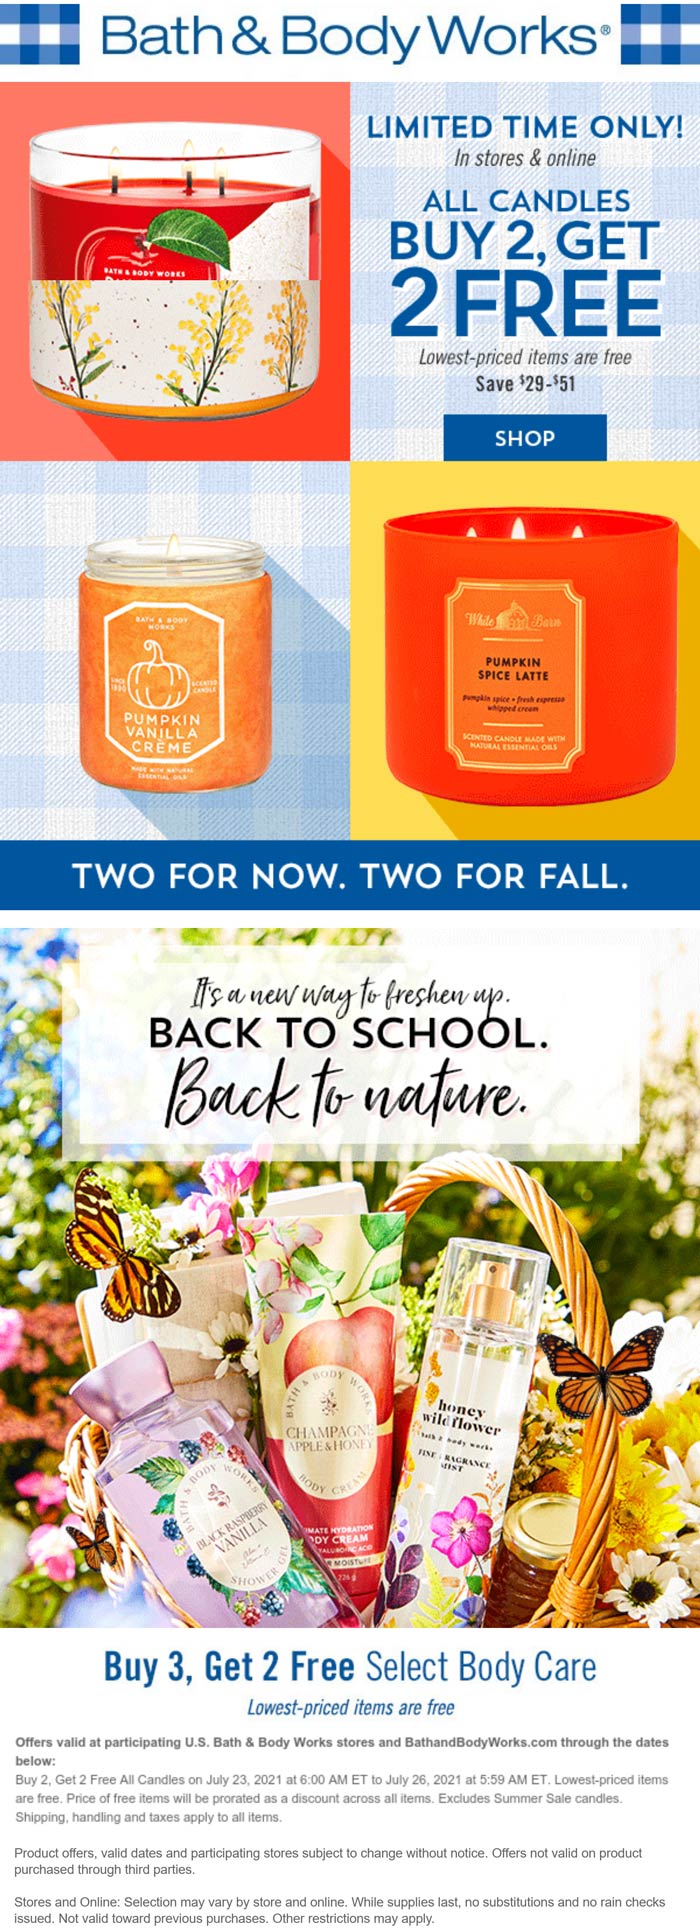 Bath & Body Works coupons & promo code for [November 2022]